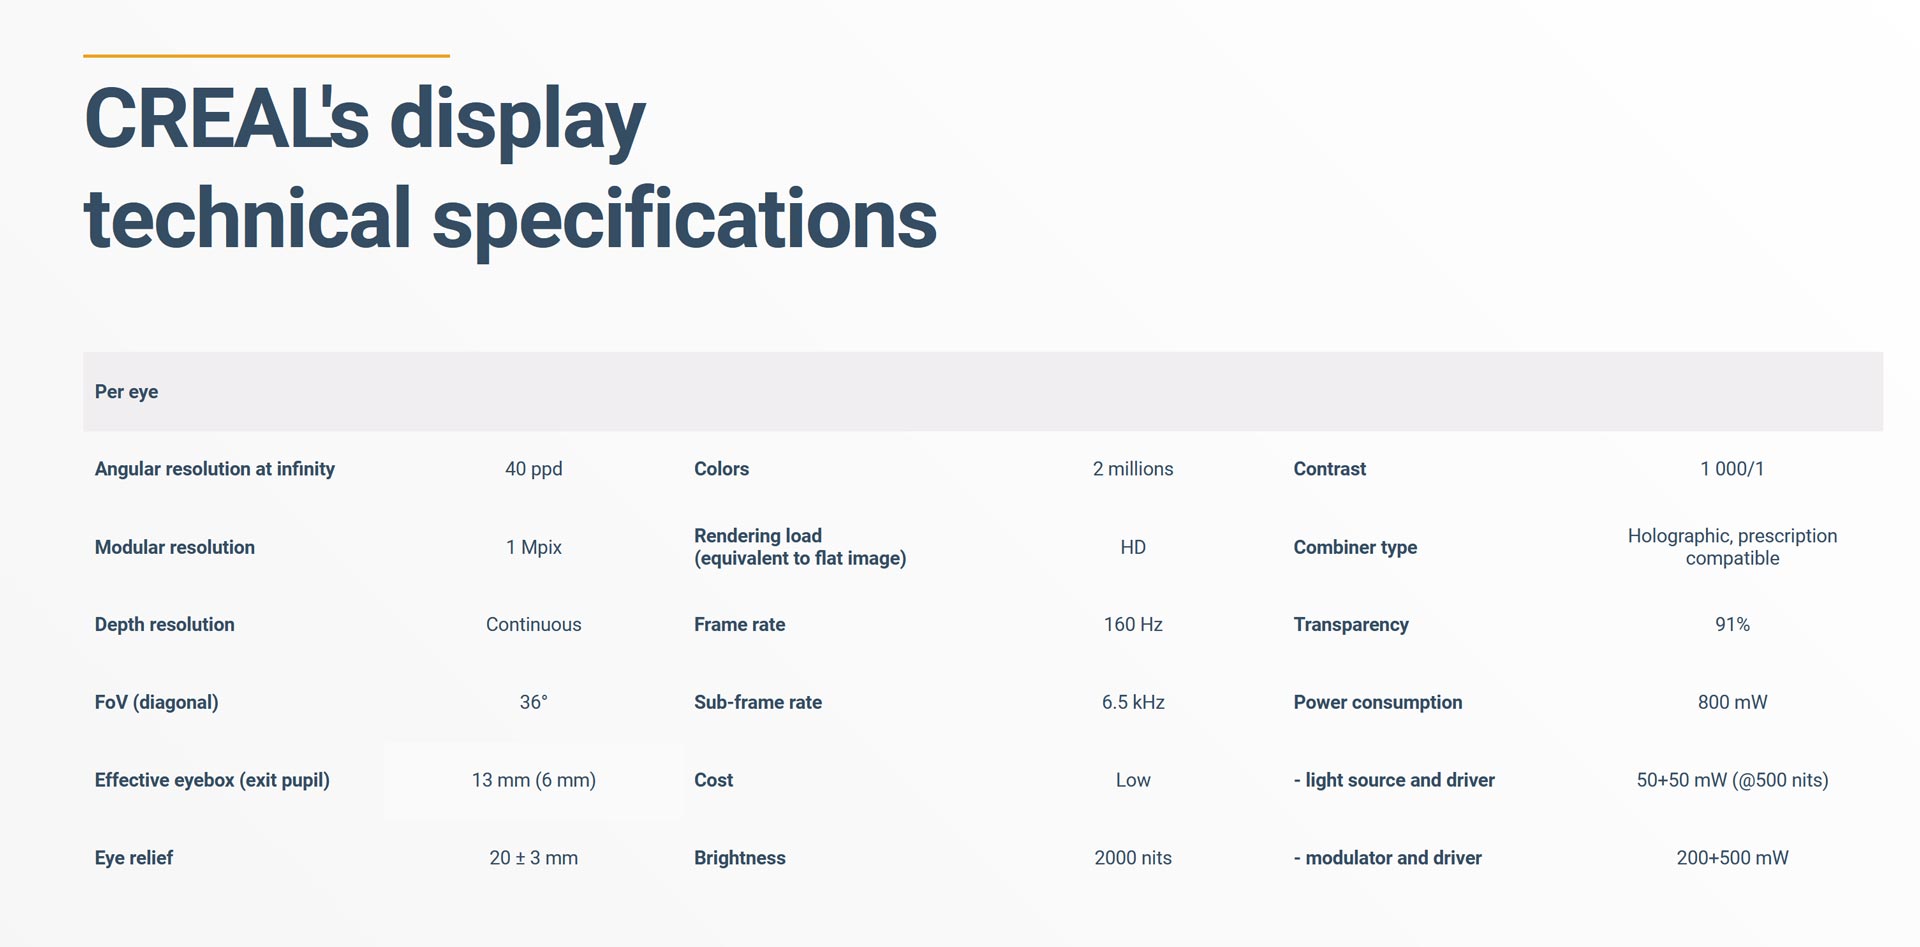 Specifications of CREAL display